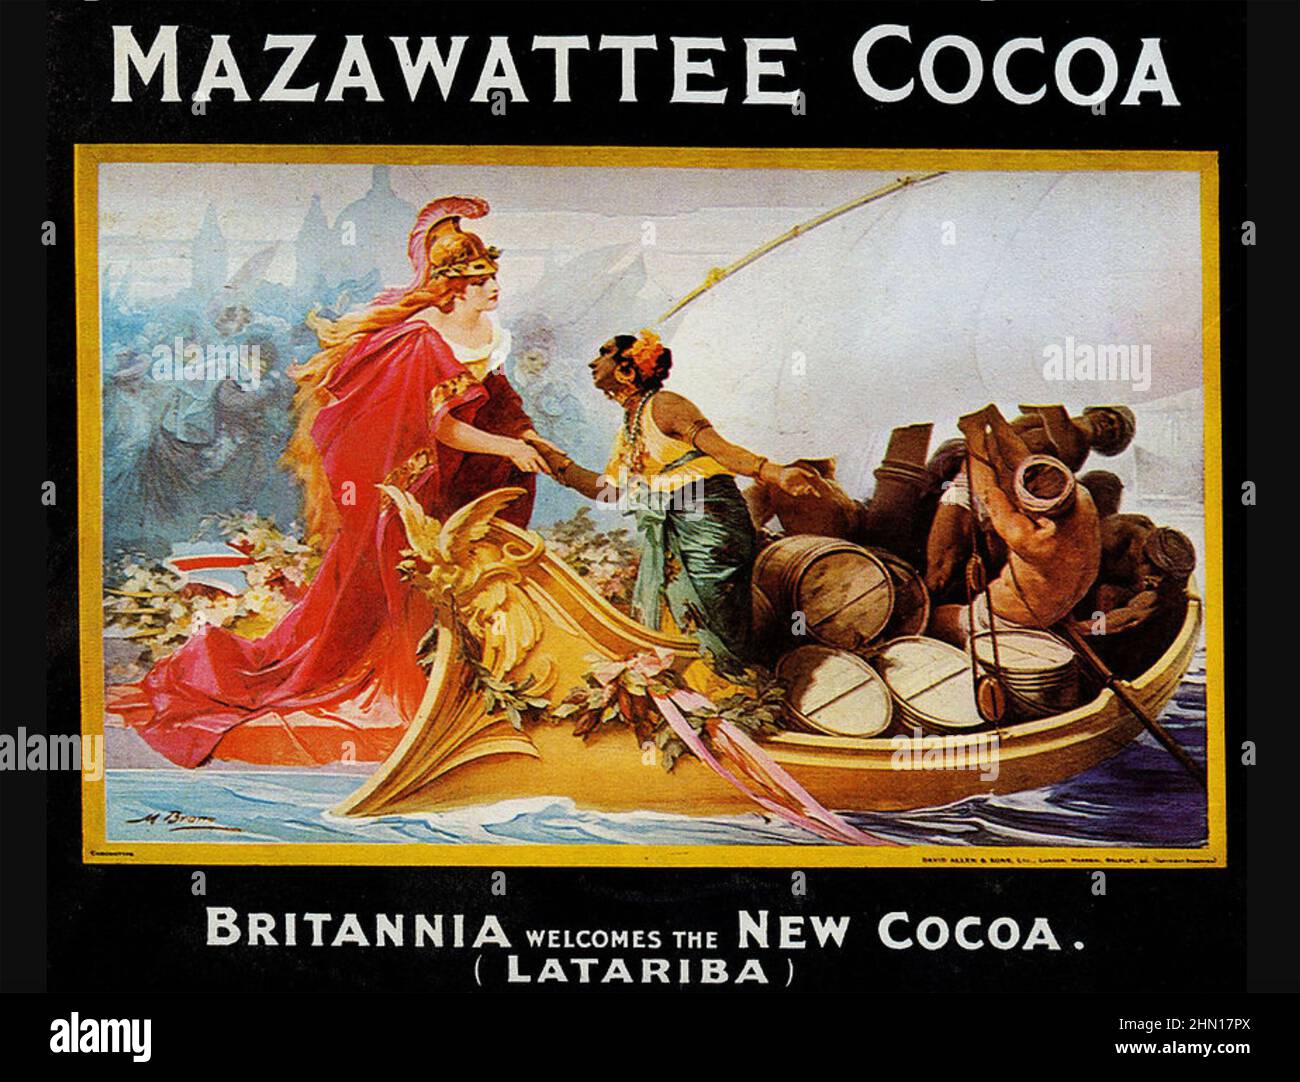 MAZAWATTEE TEA COMPANY An advert for their Latariba cocoa about 1900. Britannia welcome the arrival of a shipment. Stock Photo